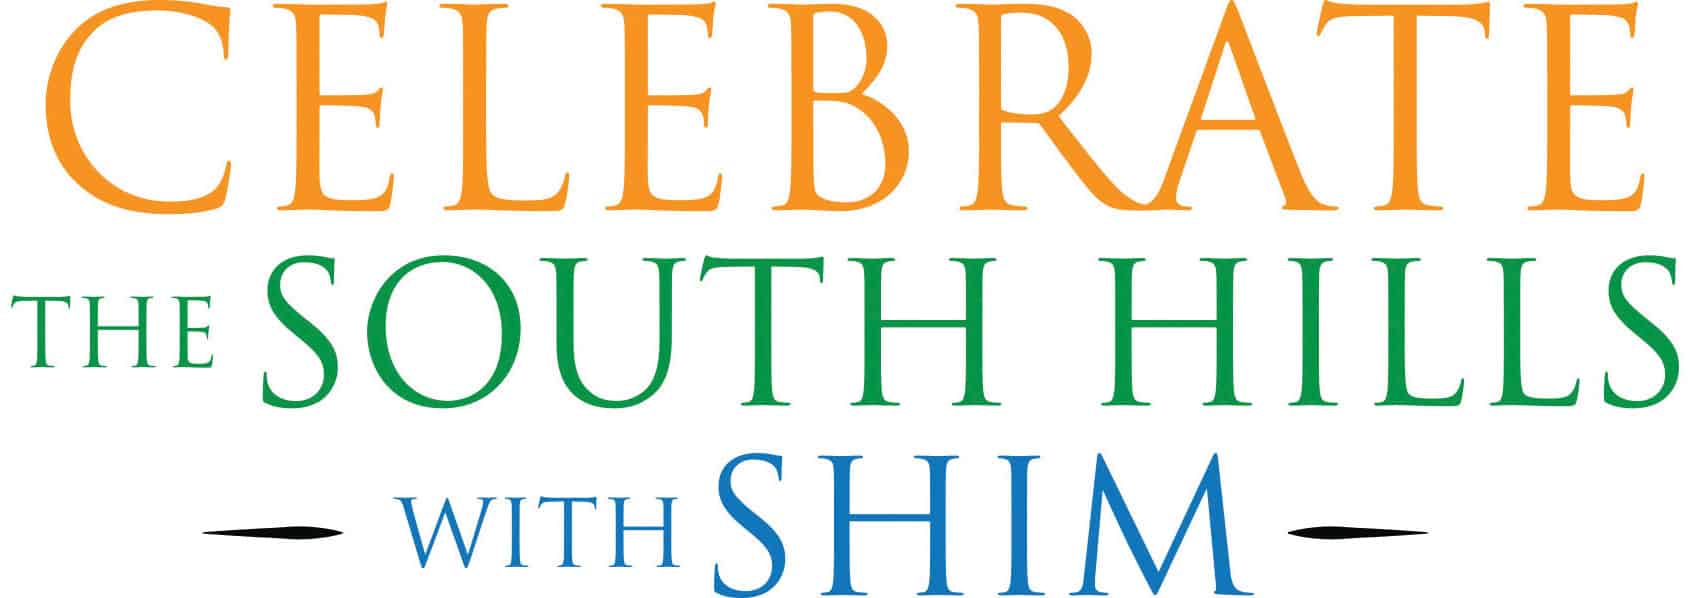 Celebrate the South Hills with SHIM